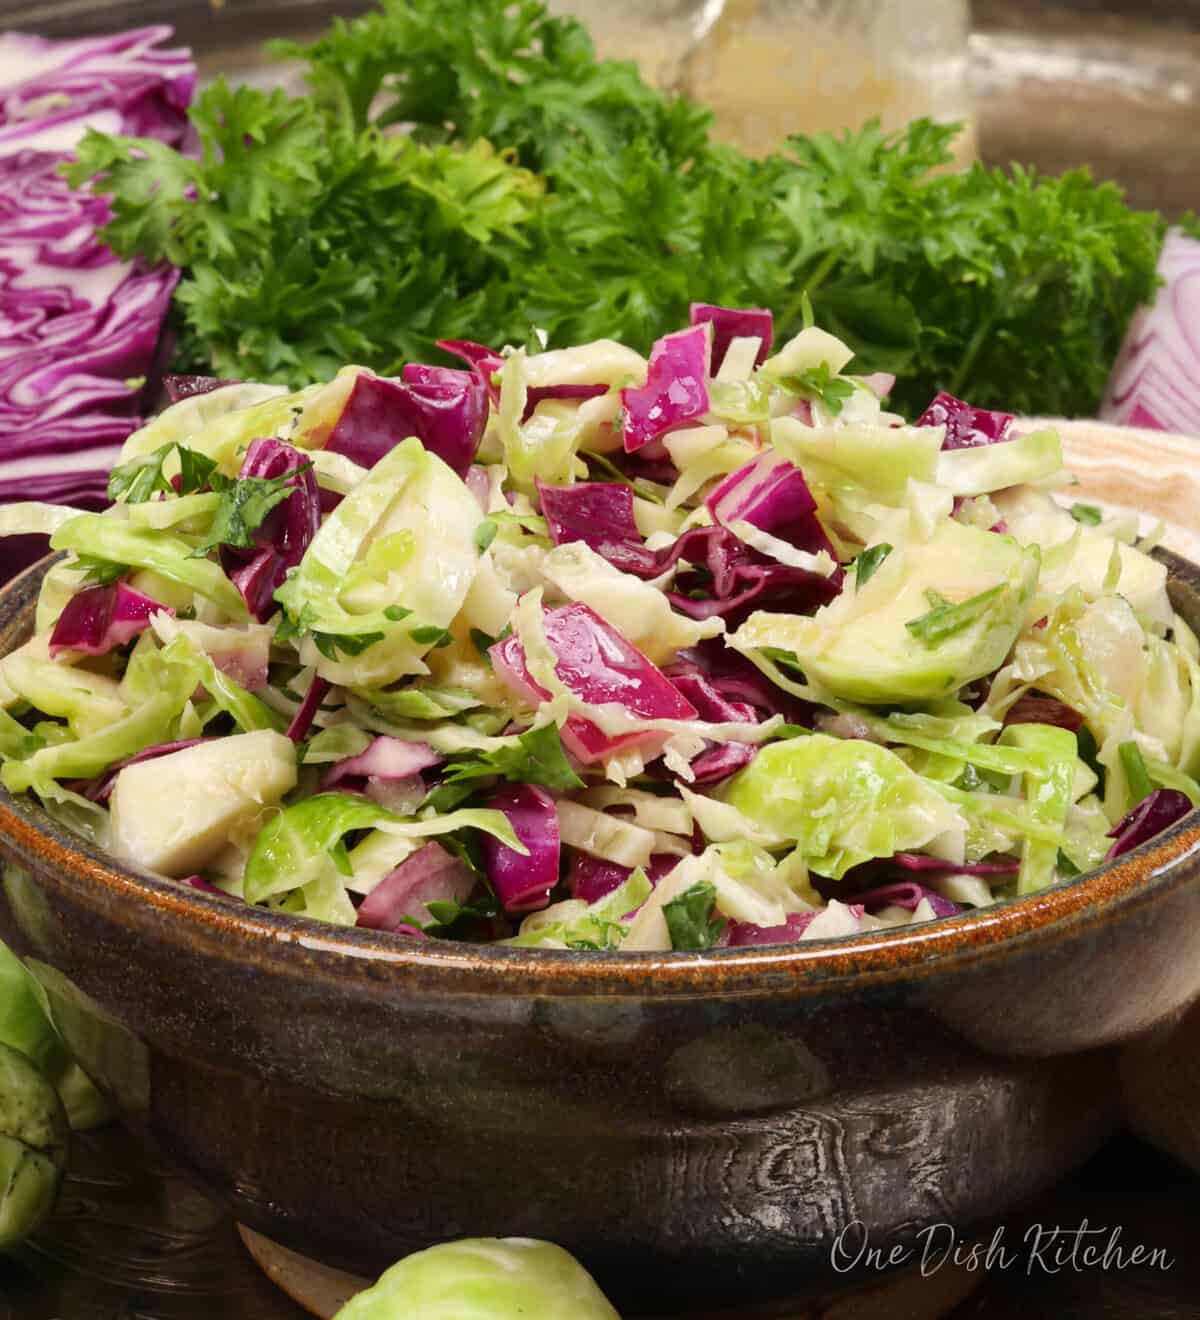 a brussels sprouts salad with red cabbage and red onions in a bowl next to fresh parsley.